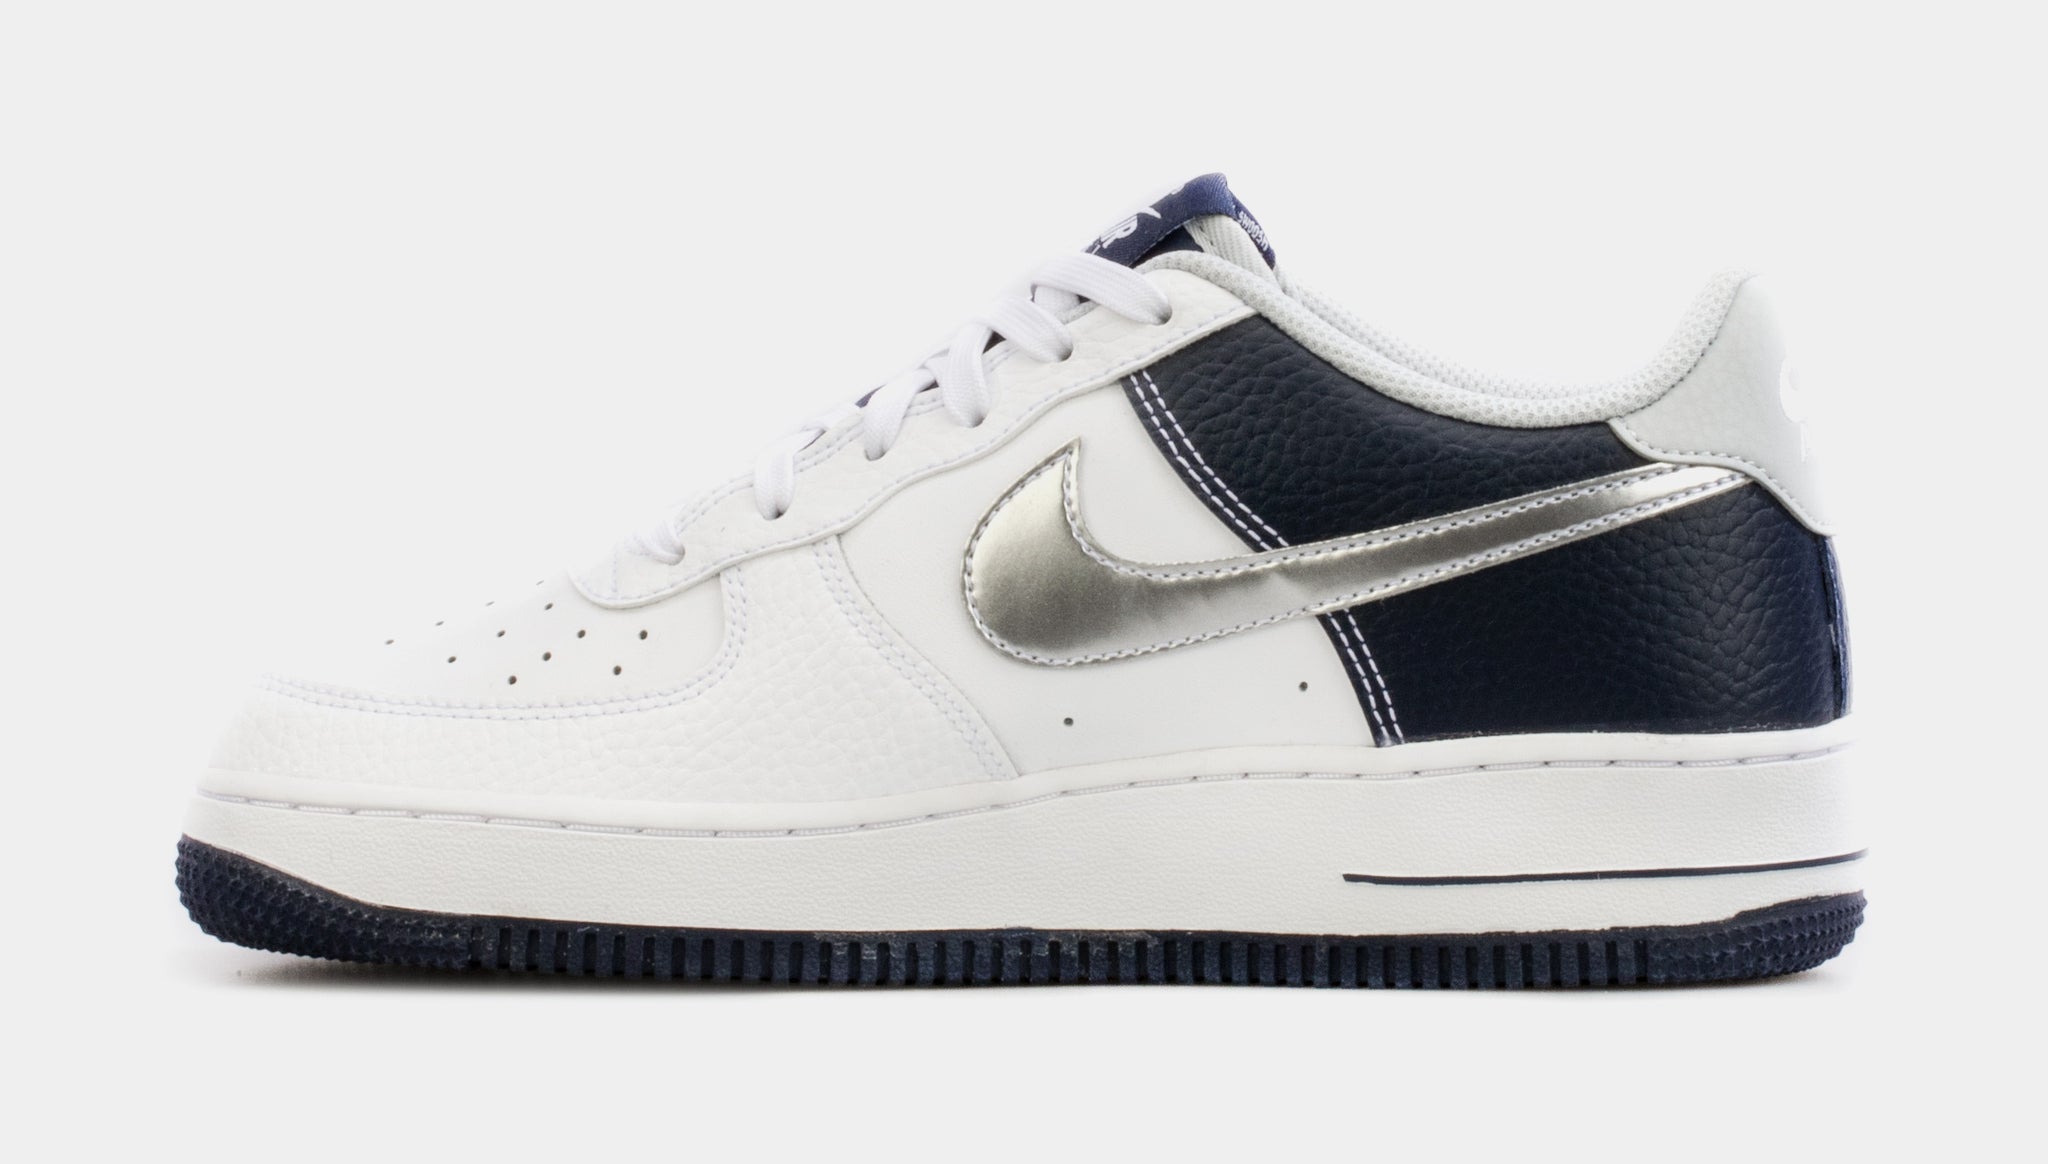 Kano bro Sølv Nike Air Force 1 Low Grade School Lifestyle Shoes White Navy DQ6048-100 –  Shoe Palace